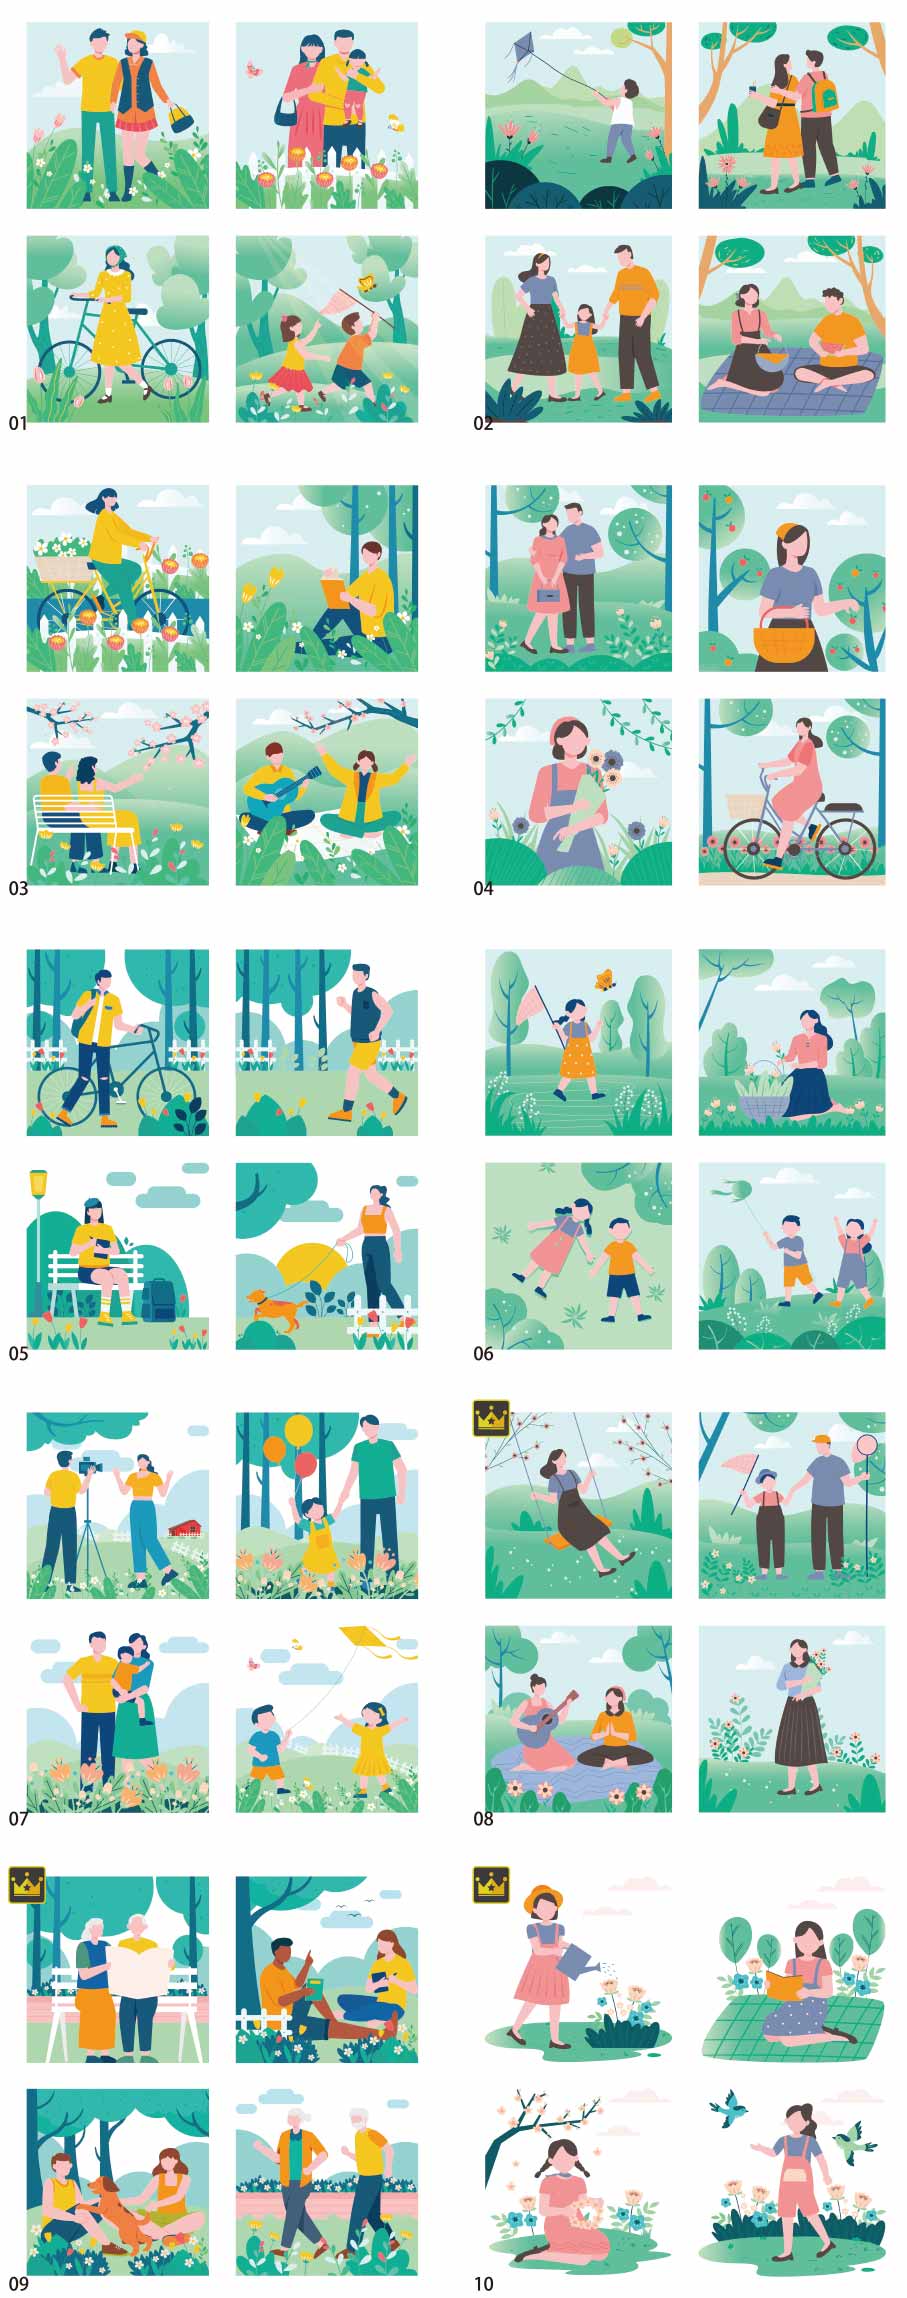 Spring outing illustration collection